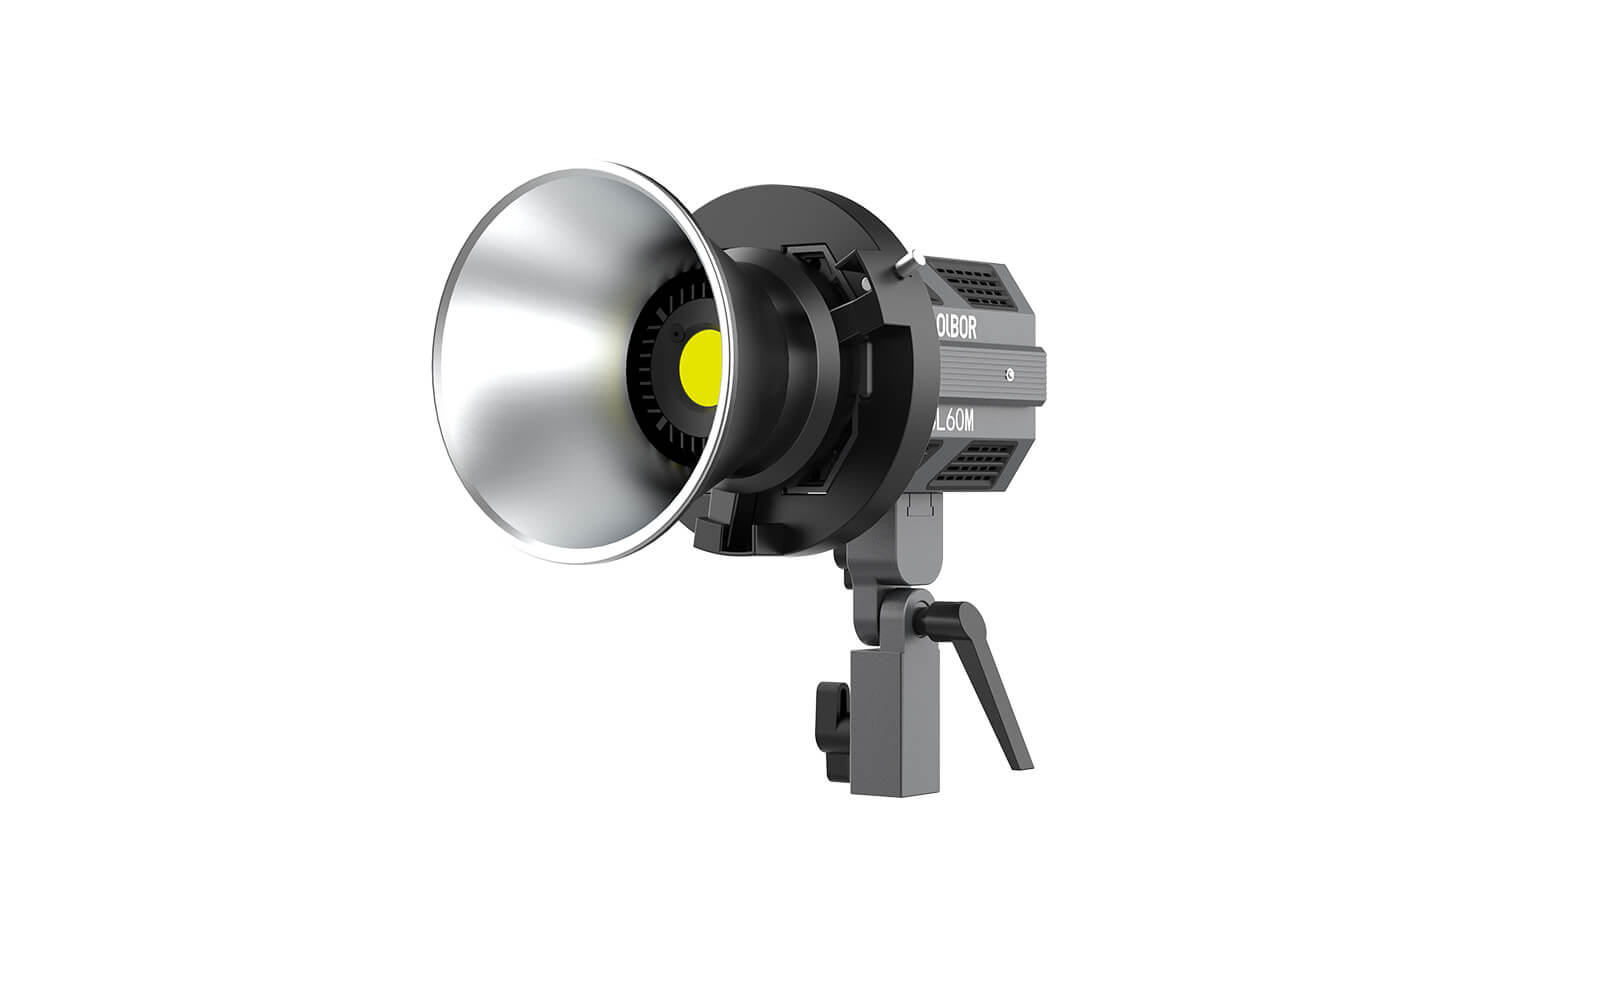 COLBOR CL60M studio light for video shooting has a Bowen-mount adapter to use with reflector.